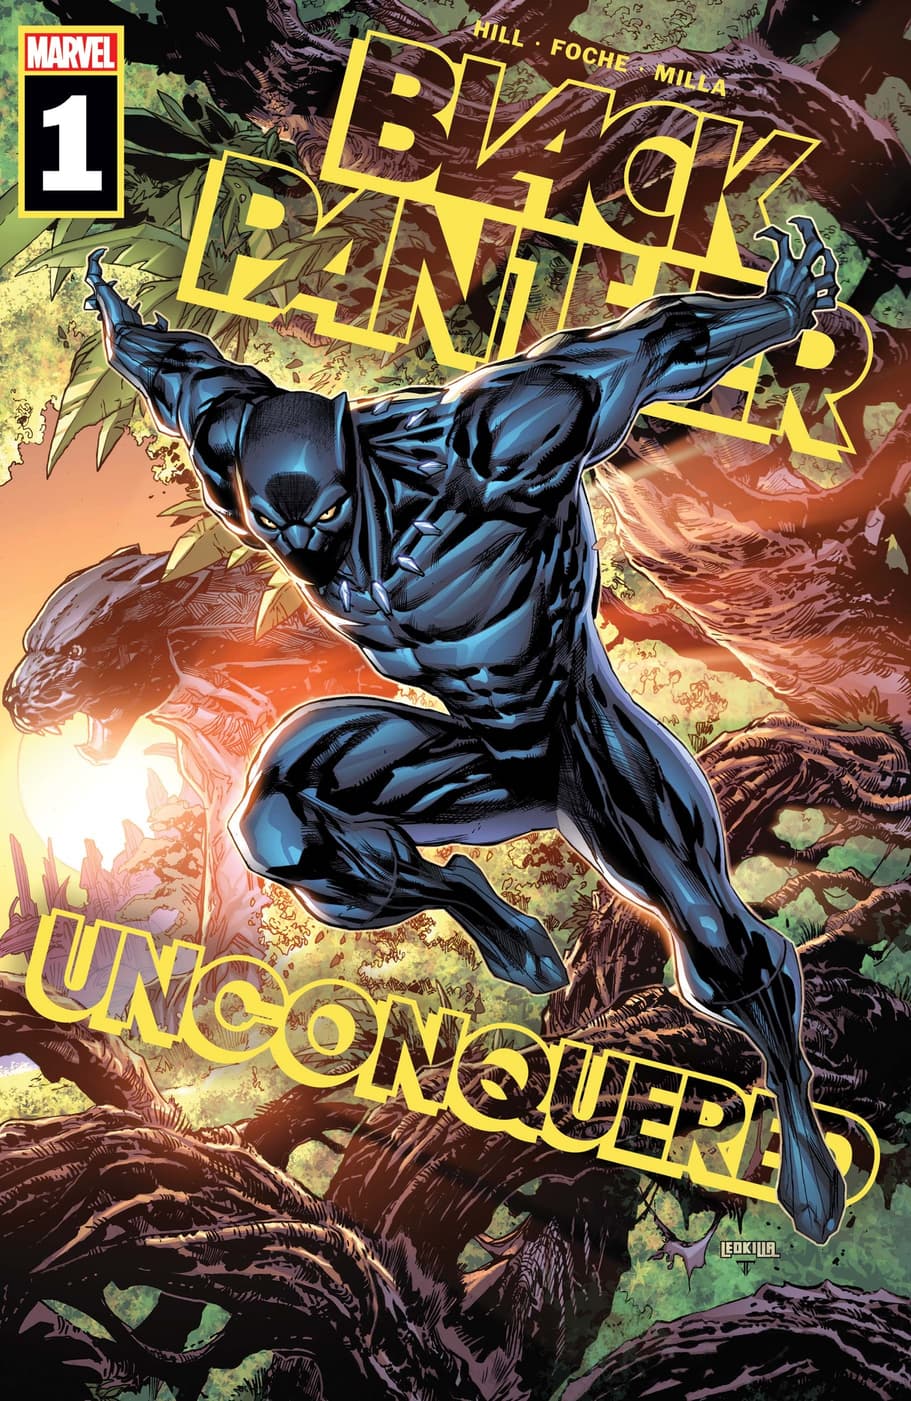 Cover to BLACK PANTHER: UNCONQUERED #1 by Ken Lashley and Juan Fernandez.